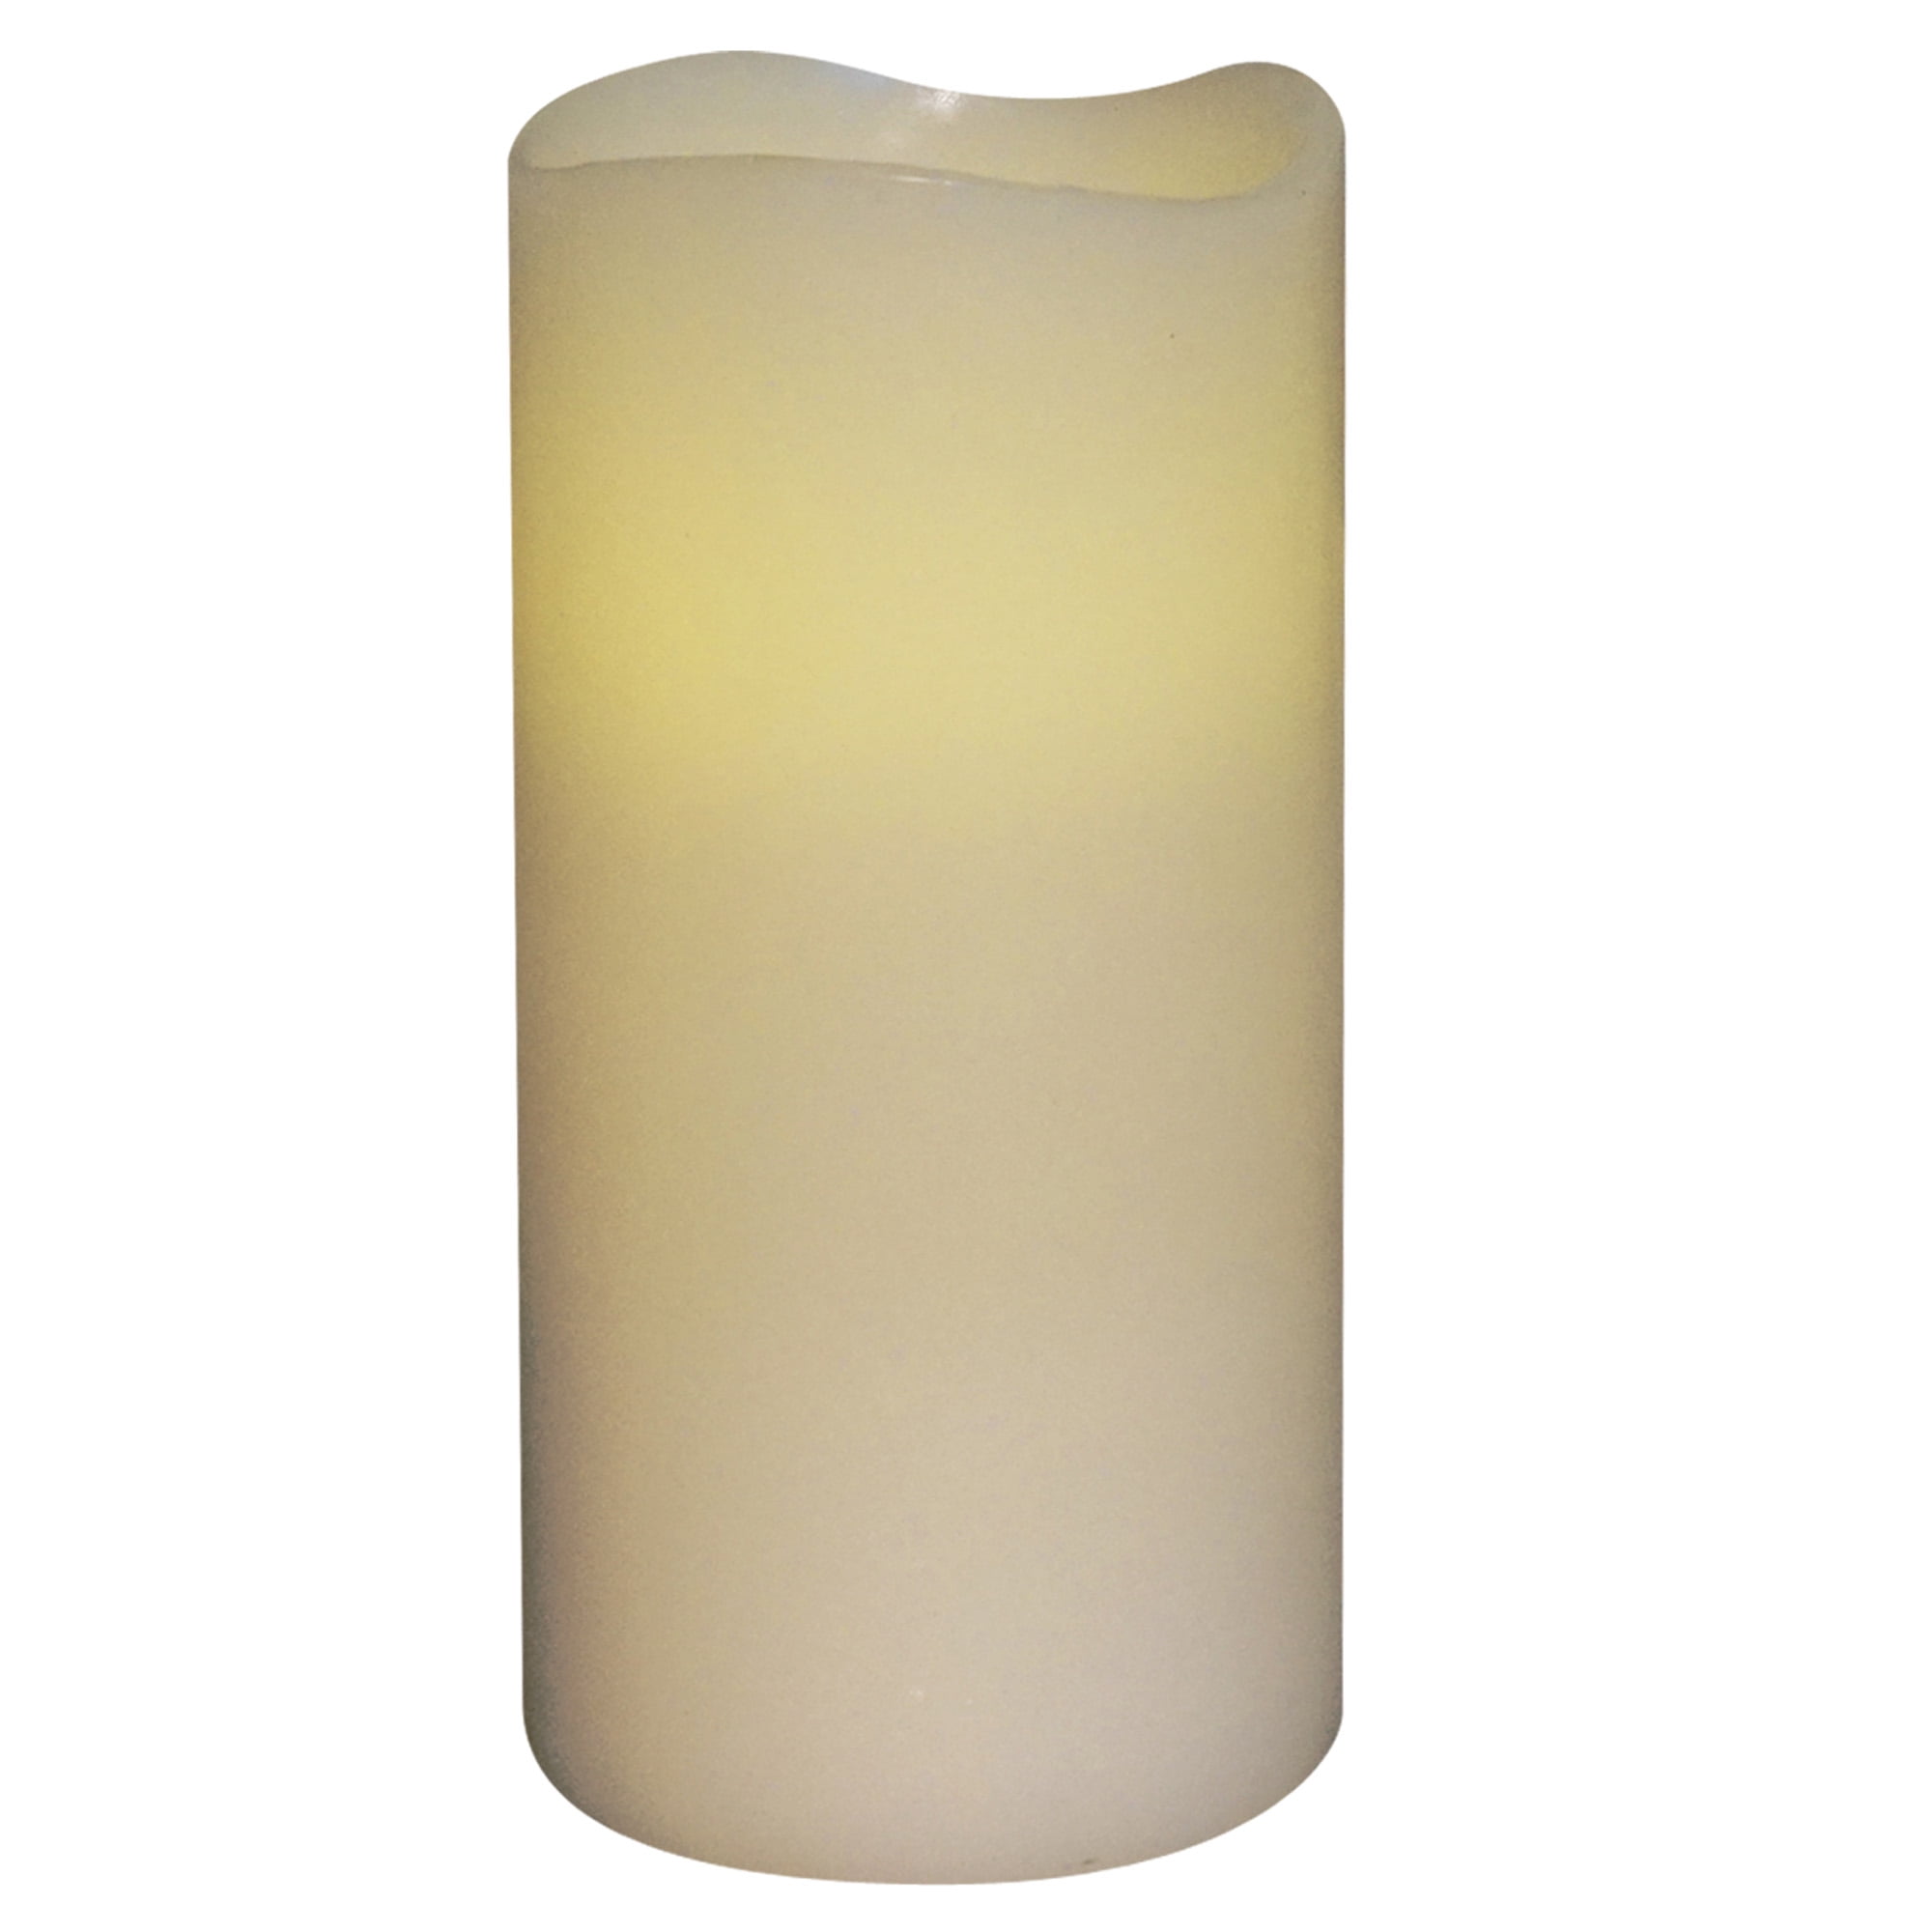 6-Inch Tall Inglow CG54600WH00 Flameless Round Pillar Candle White 